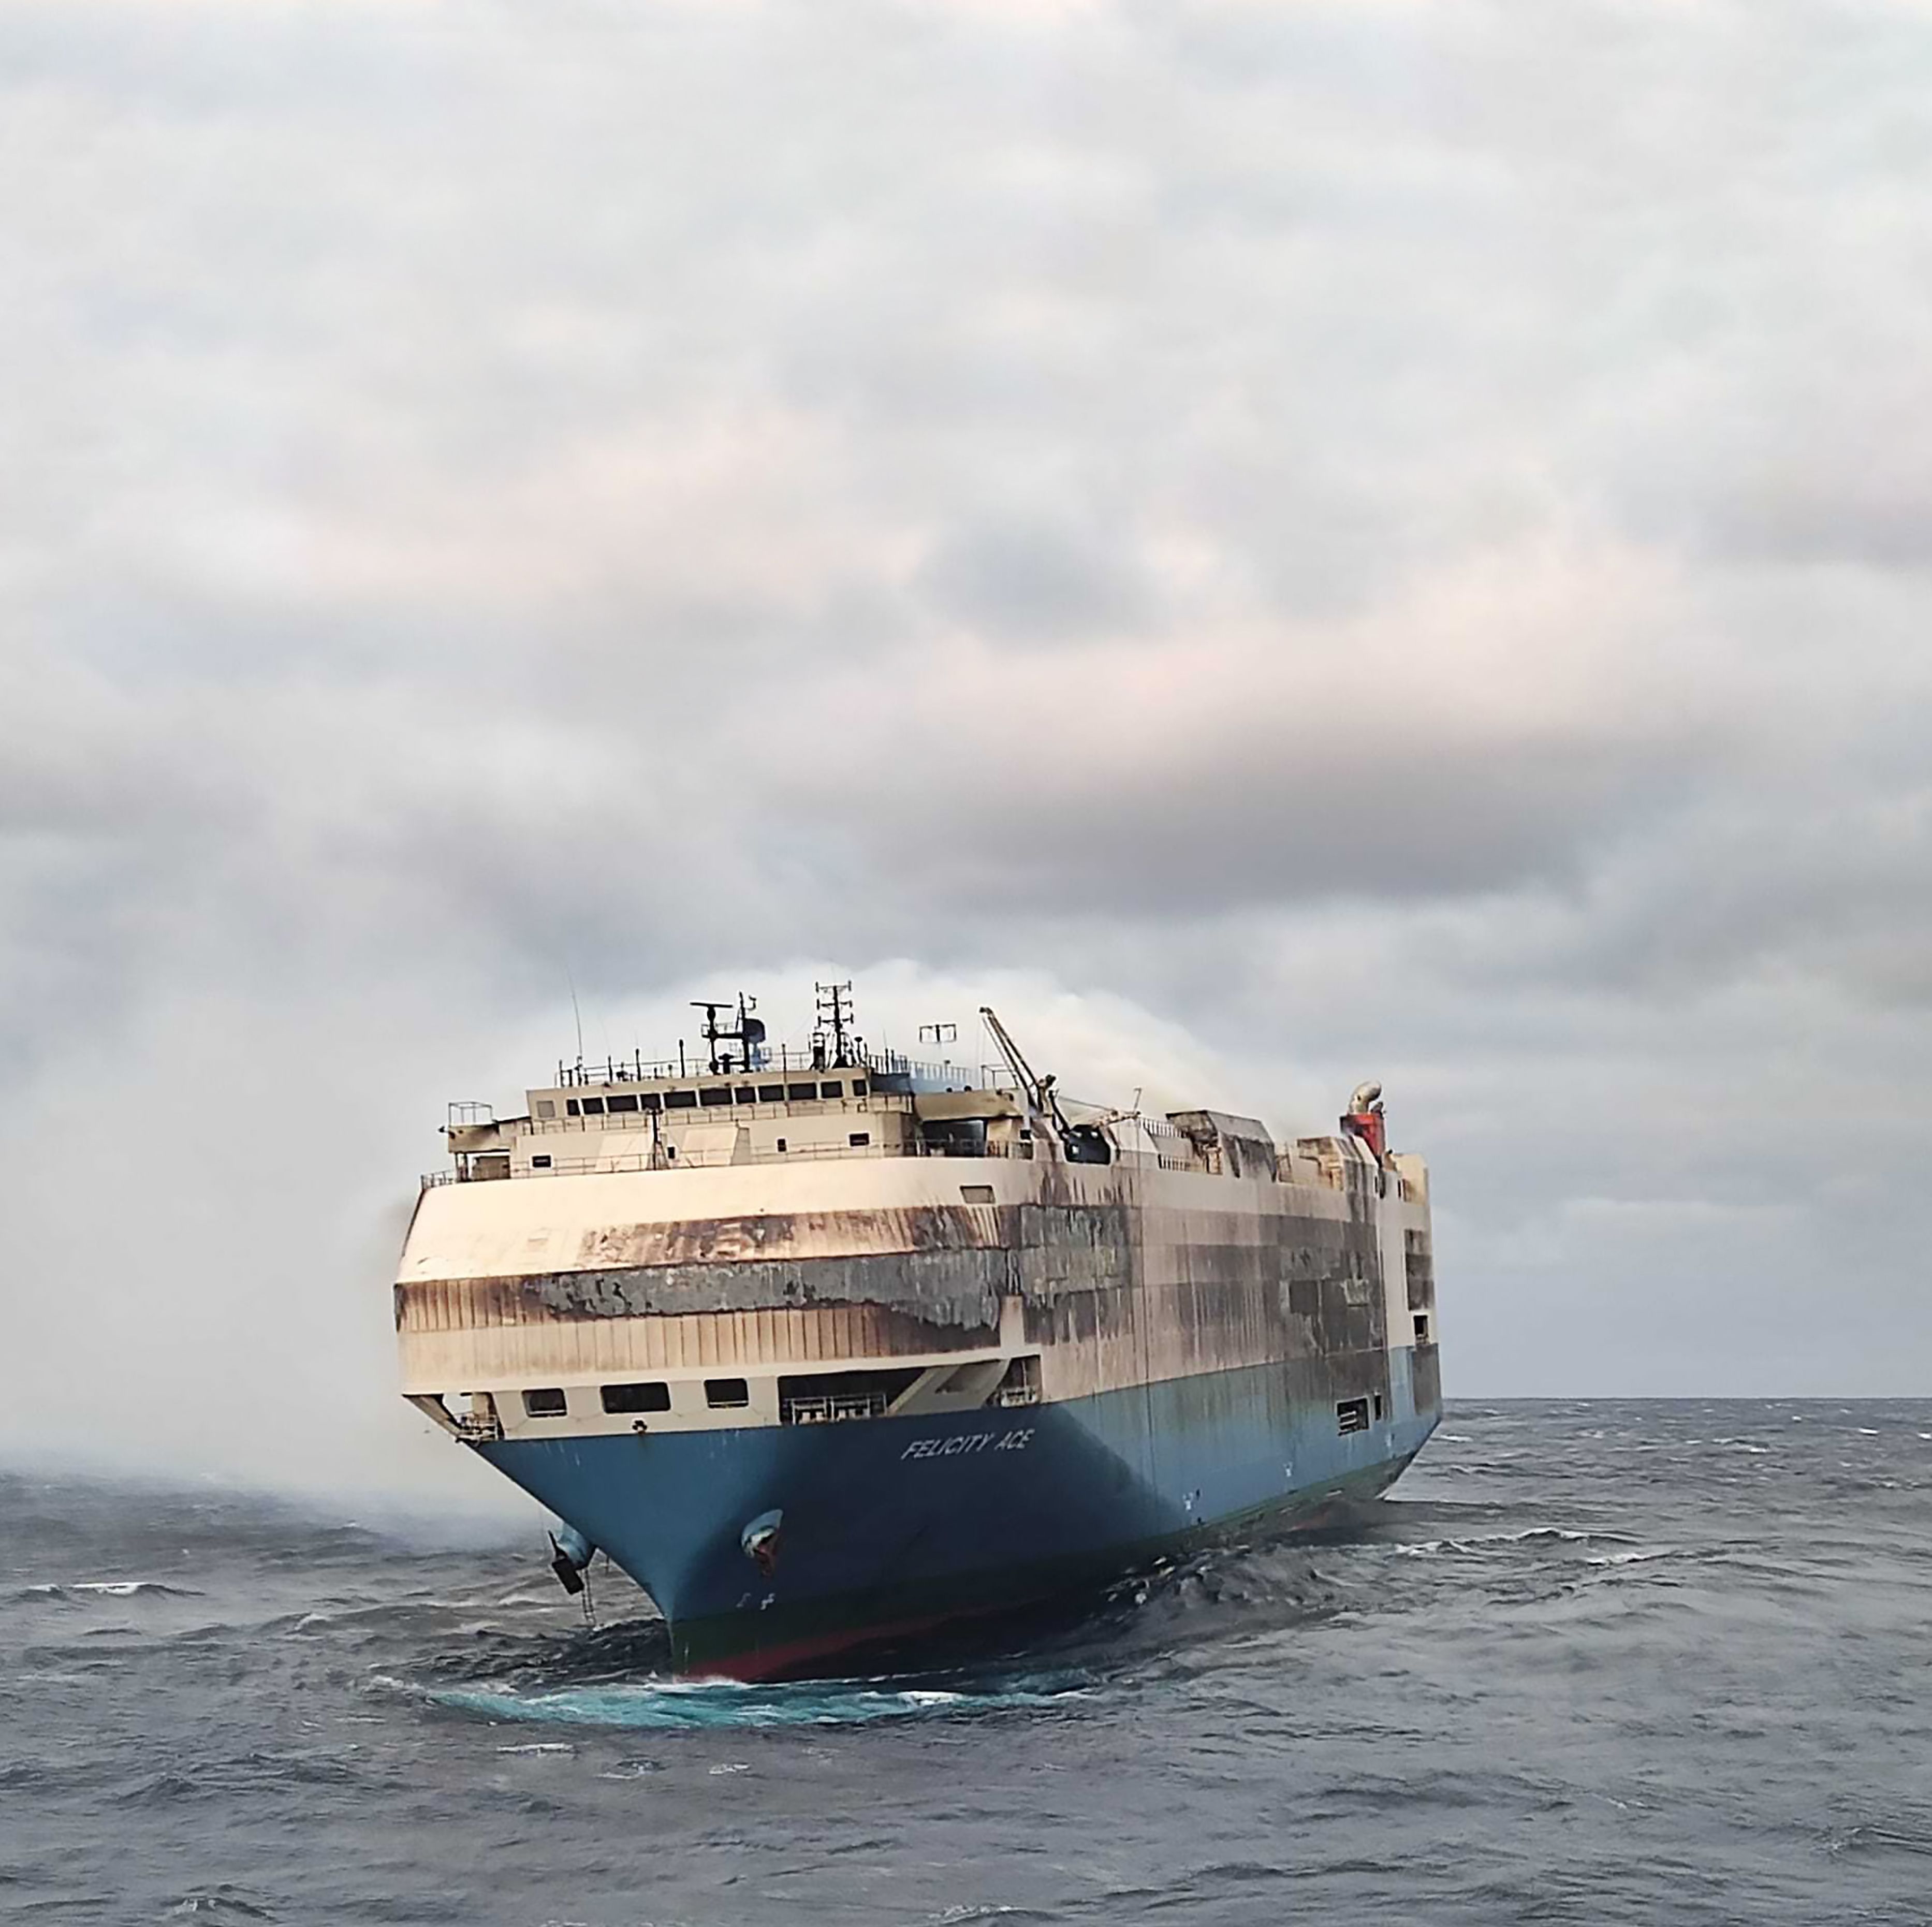 20,000 Vehicles Under the Sea: Inside the Felicity Ace Disaster